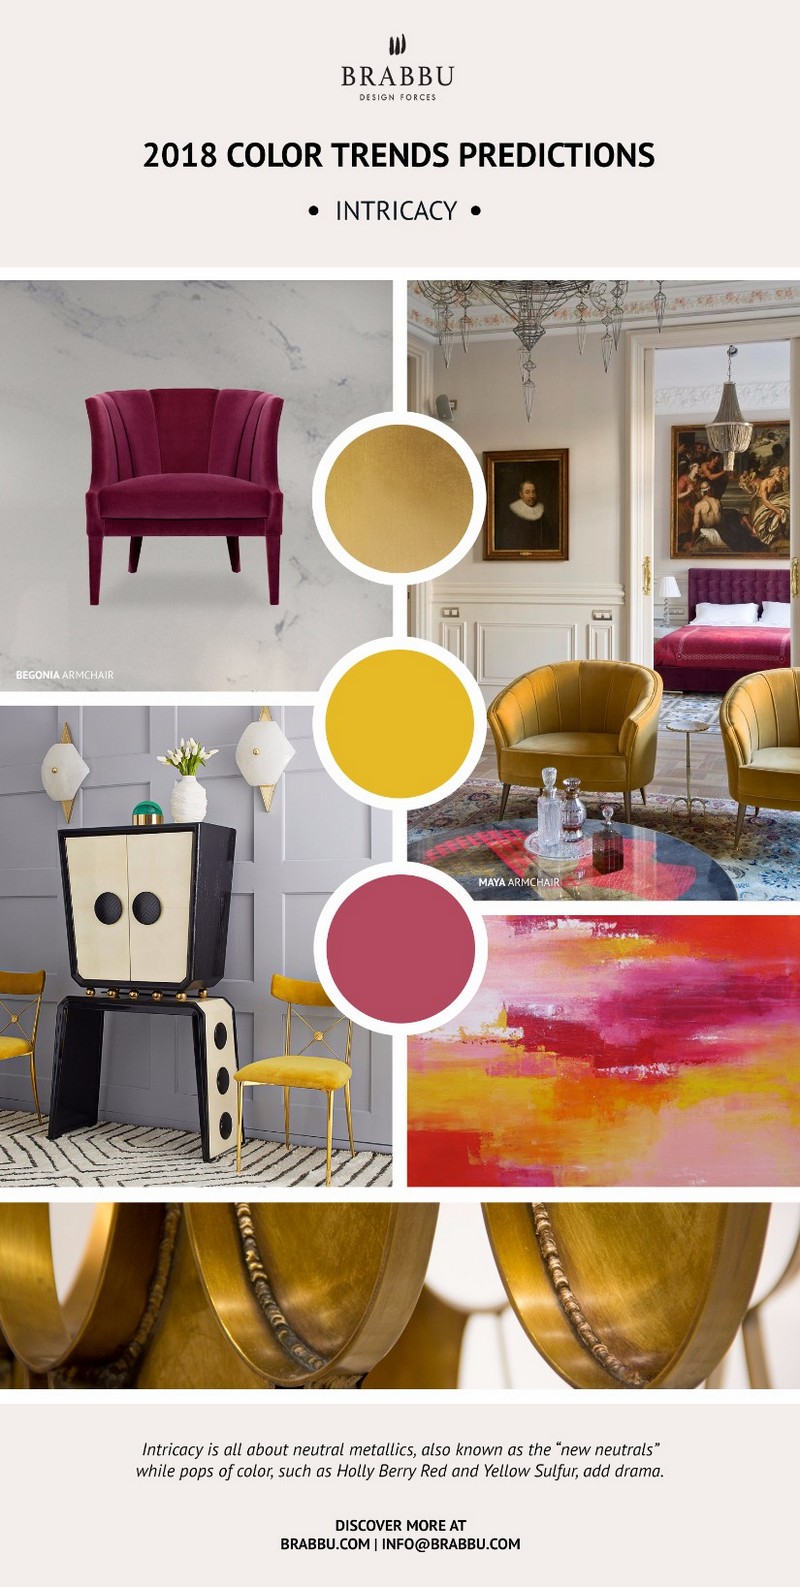 Pantone 2018 Color Trends For Your Next Design Project ➤ To see more news about Luxury Bathrooms in the world visit us at http://luxurybathrooms.eu/ #luxurybathrooms #interiordesign #homedecor @BathroomsLuxury @bocadolobo @delightfulll @brabbu @essentialhomeeu @circudesign @mvalentinabath @luxxu @covethouse_